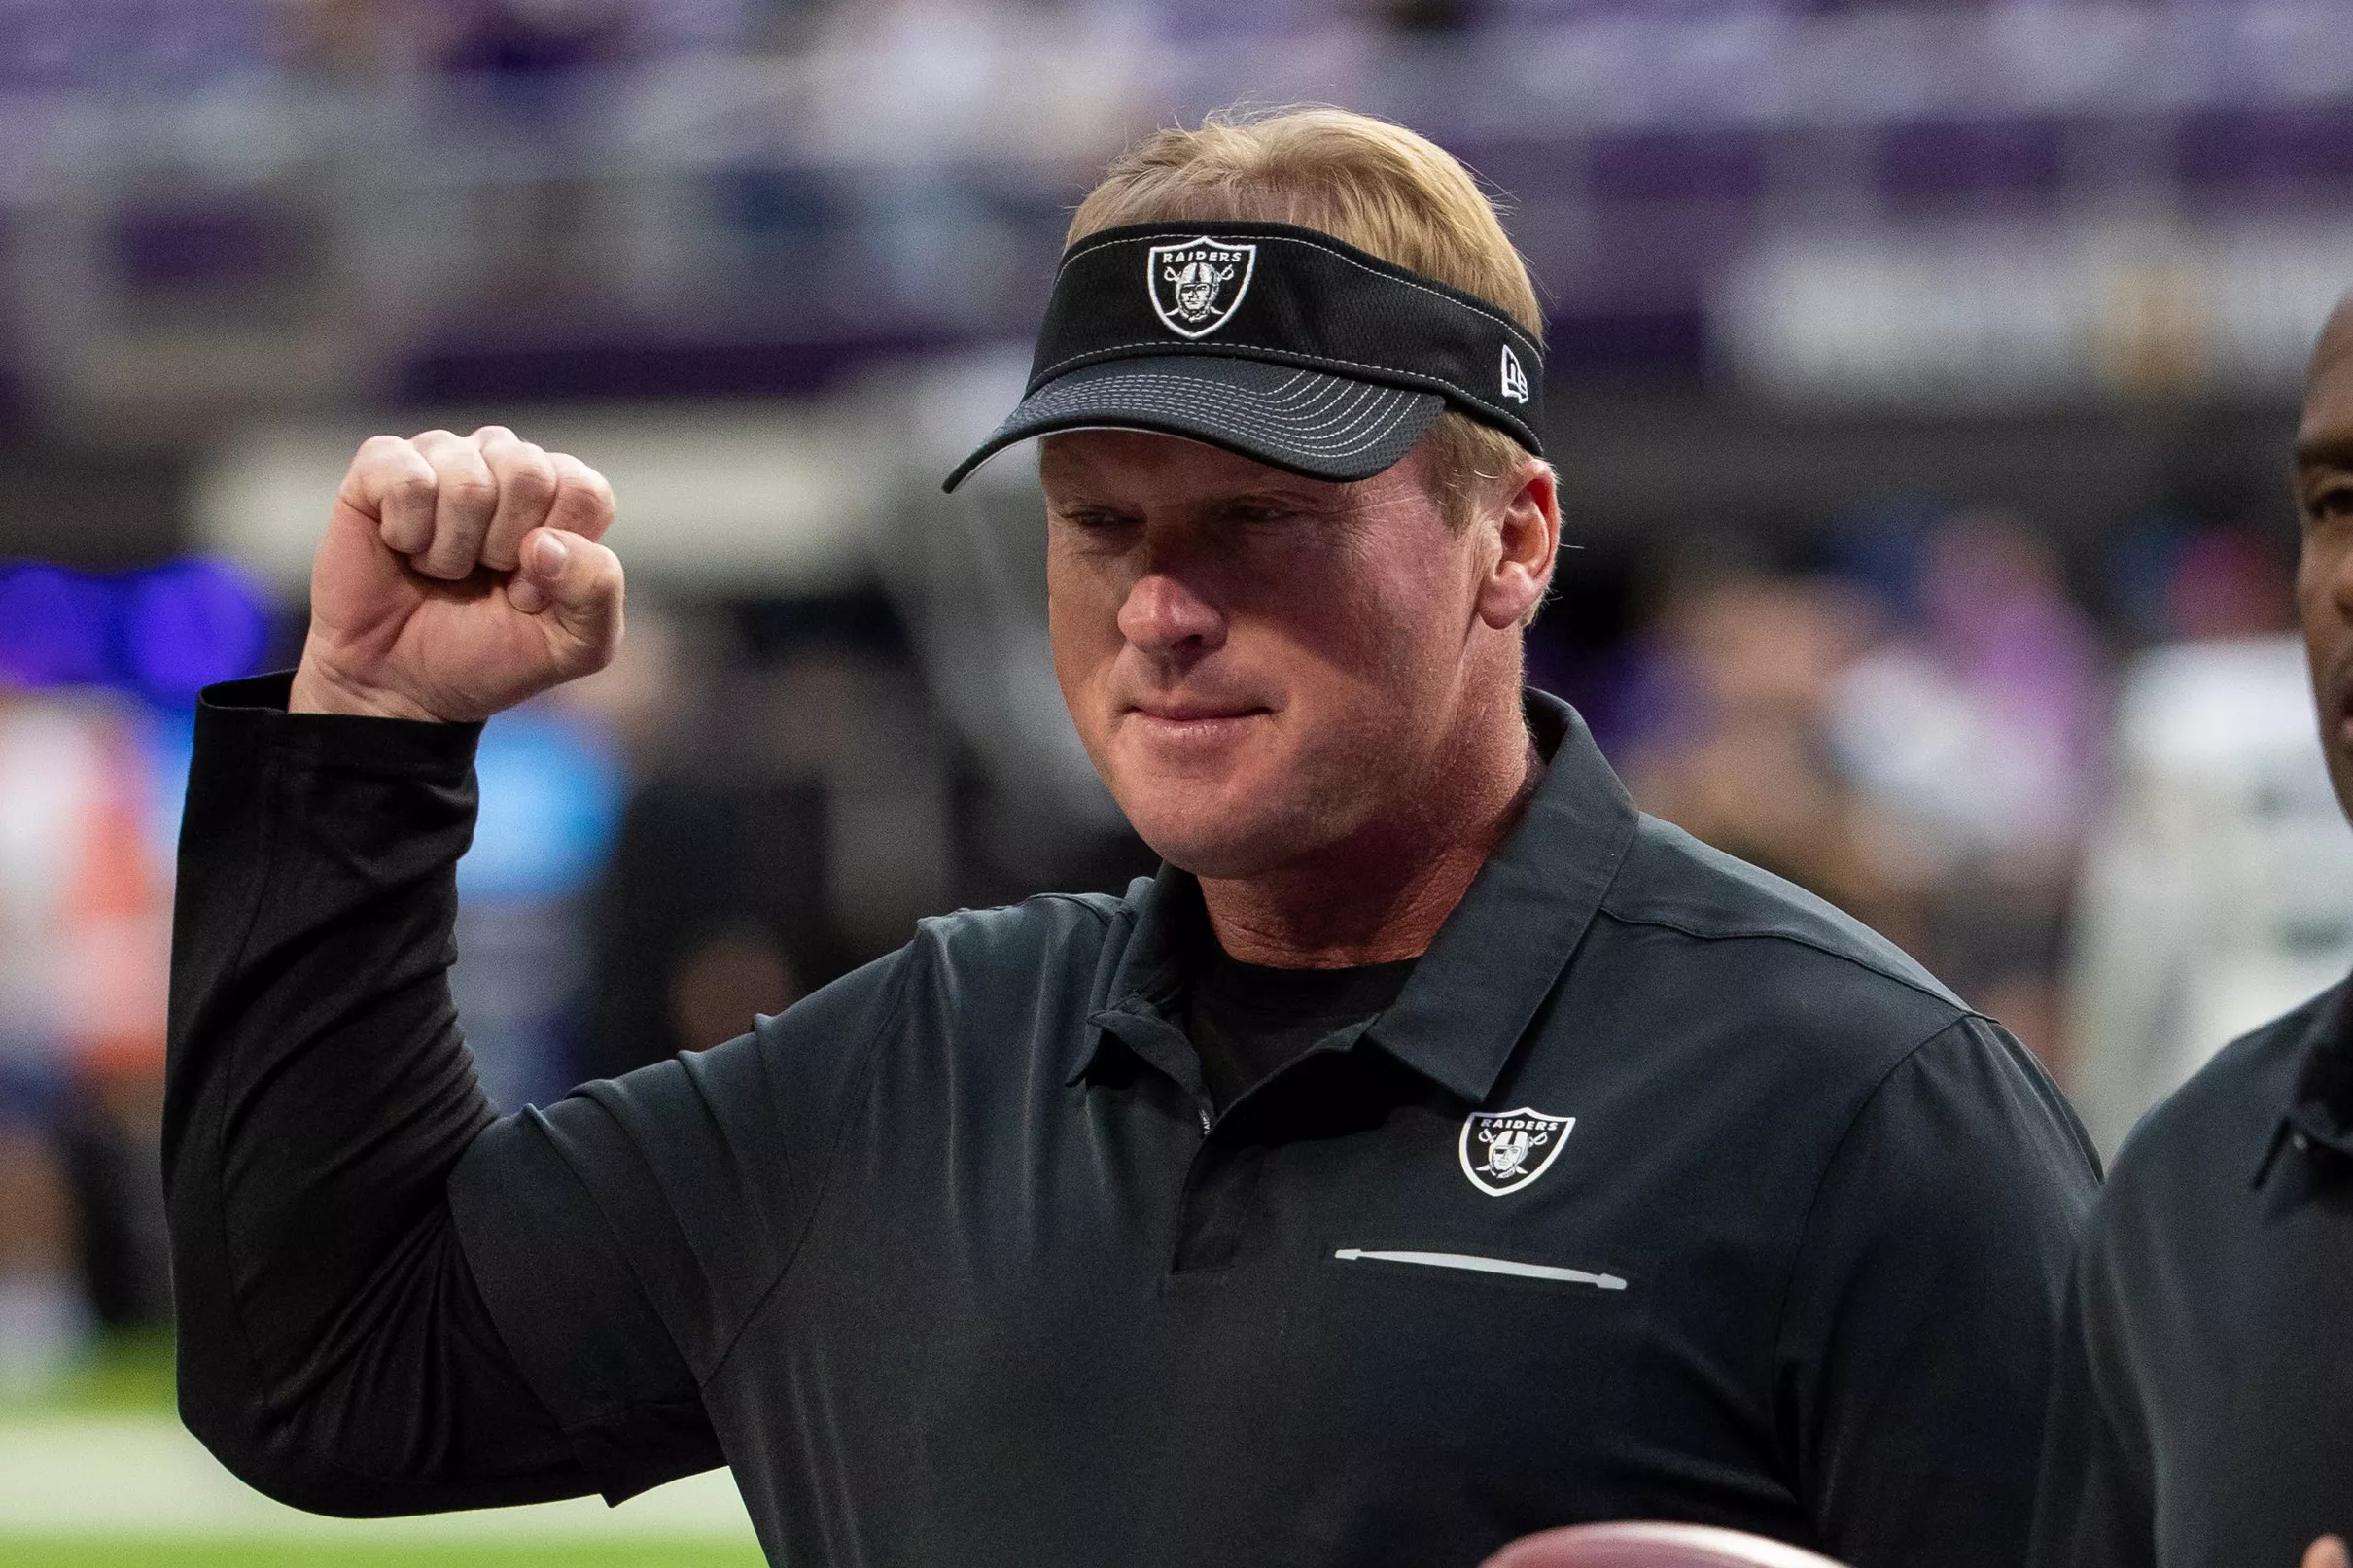 Jon Gruden ‘I’m as proud of this win as any one I’ve ever had before